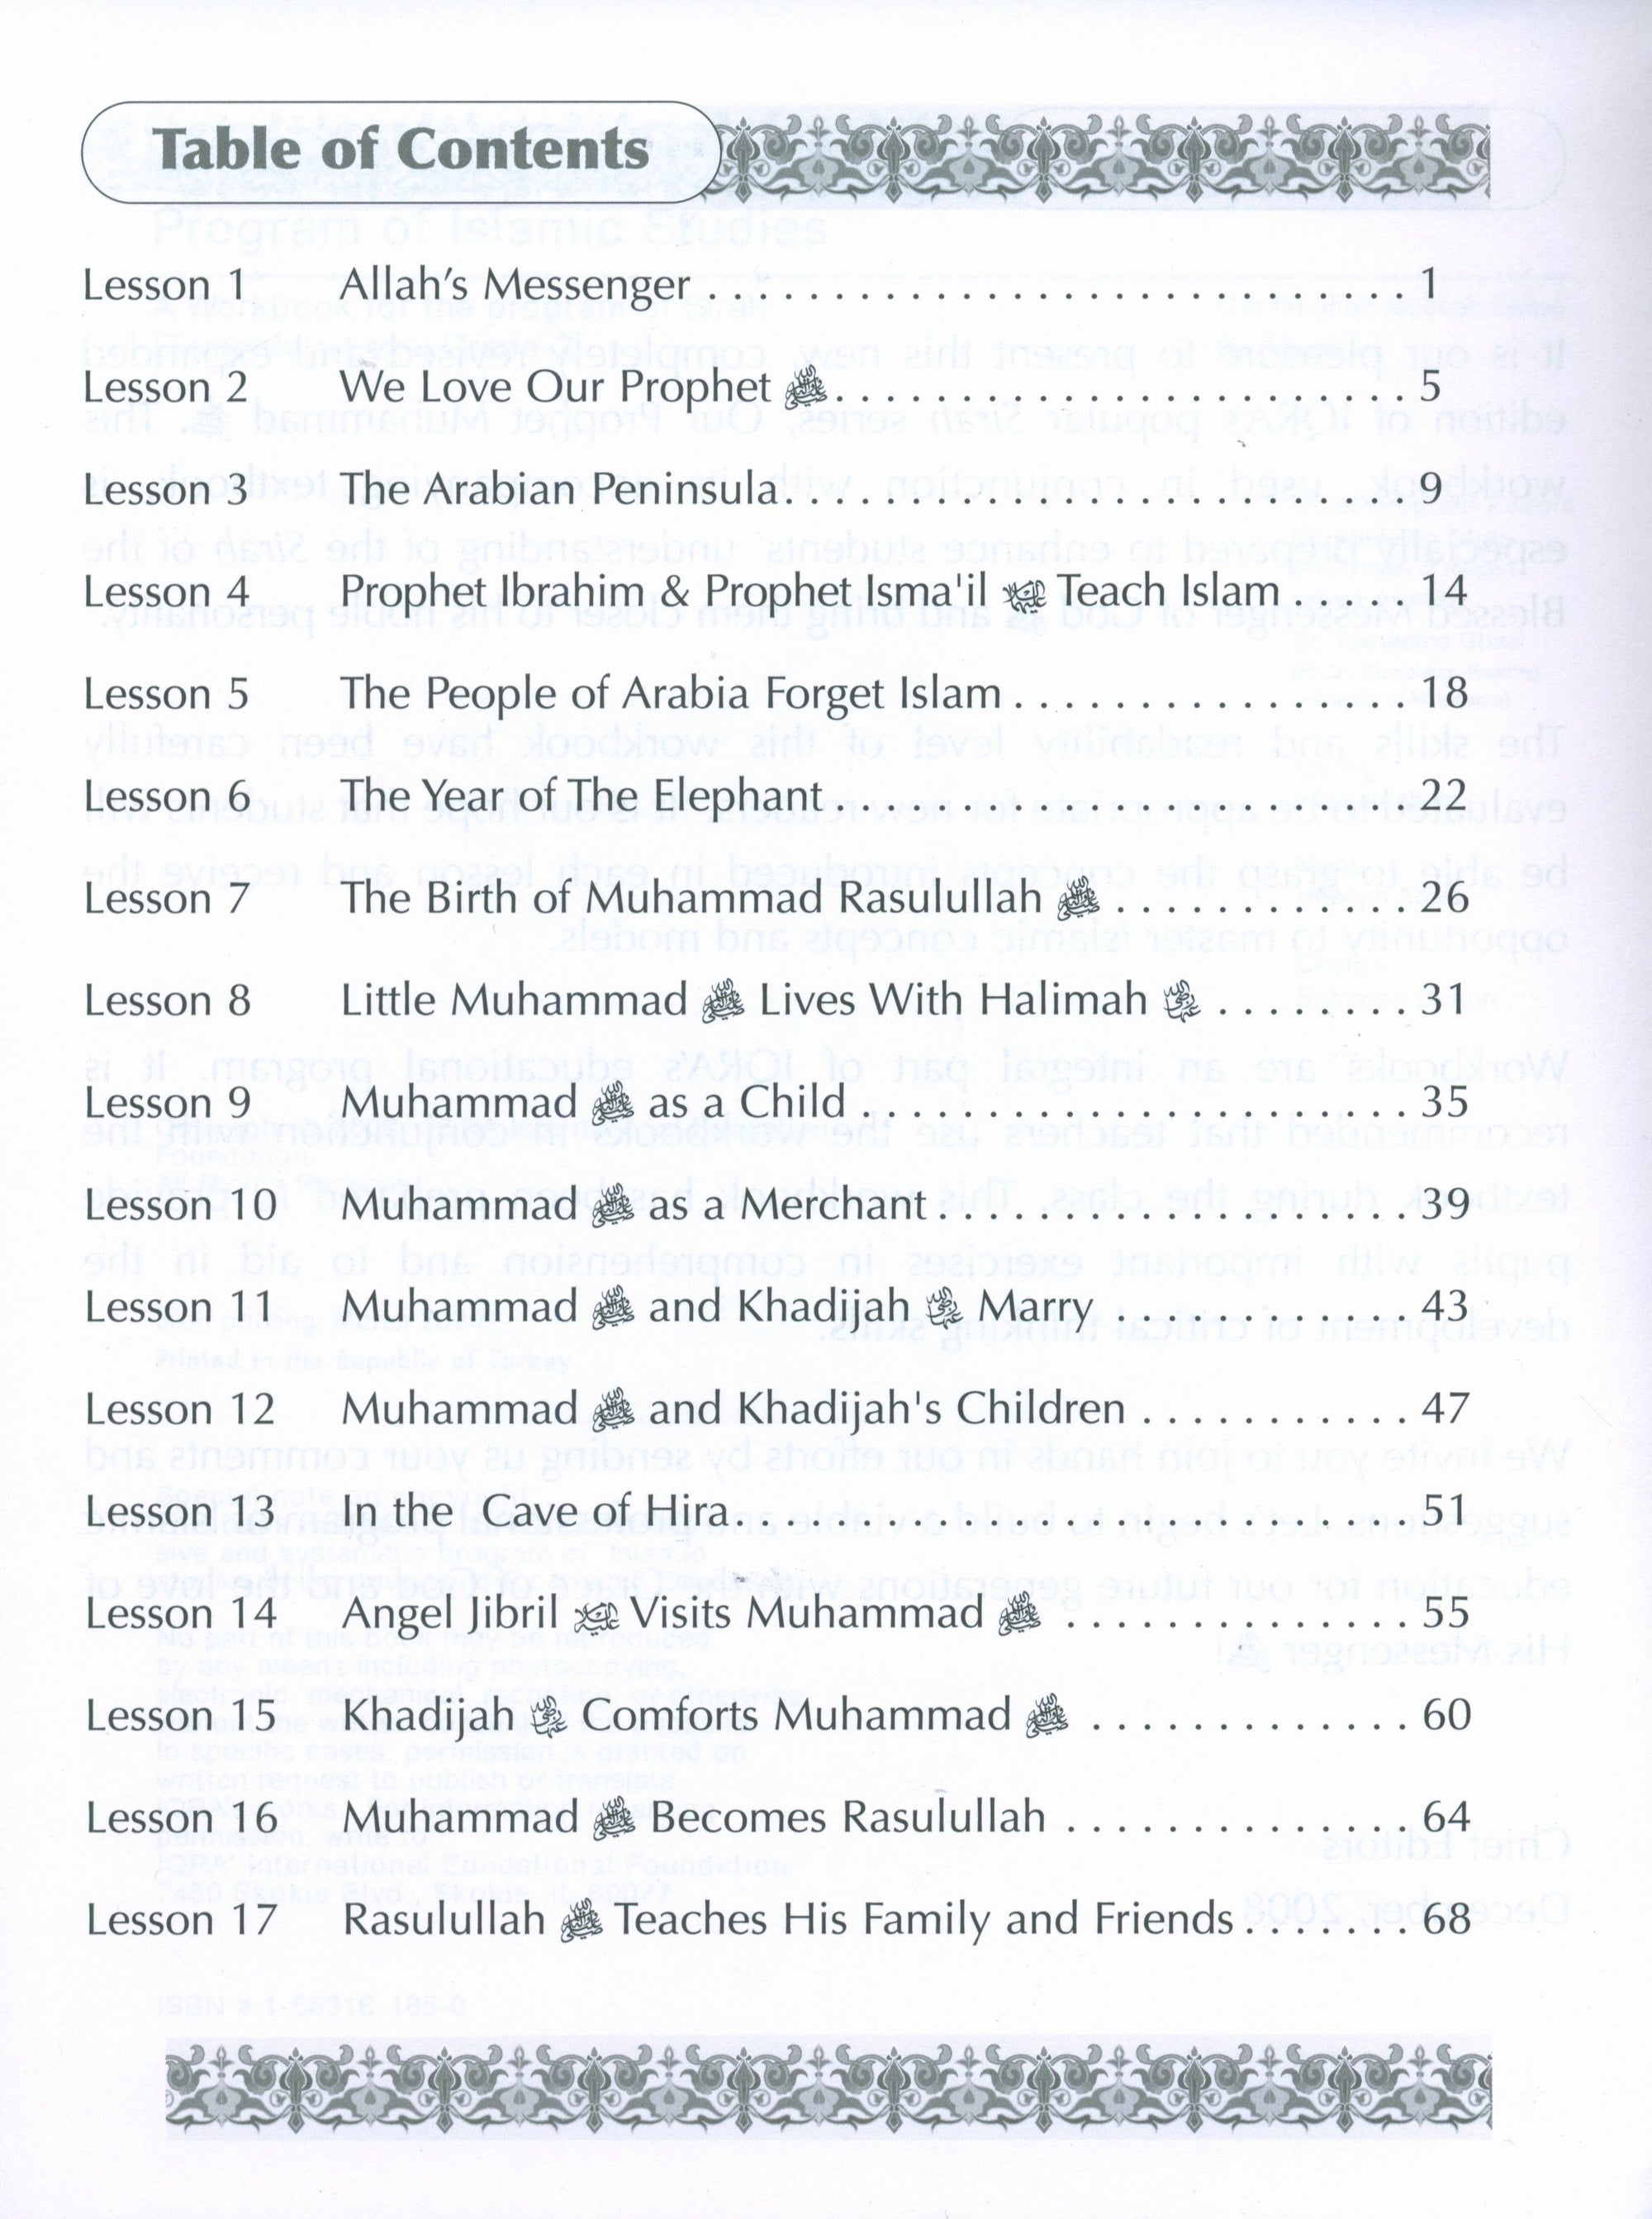 Our Prophet Muhammad (s) Life in Makkah Workbook - 2nd Grade (Sirah of Our Prophet - A Mercy to Mankind Workbook 2nd Grade)